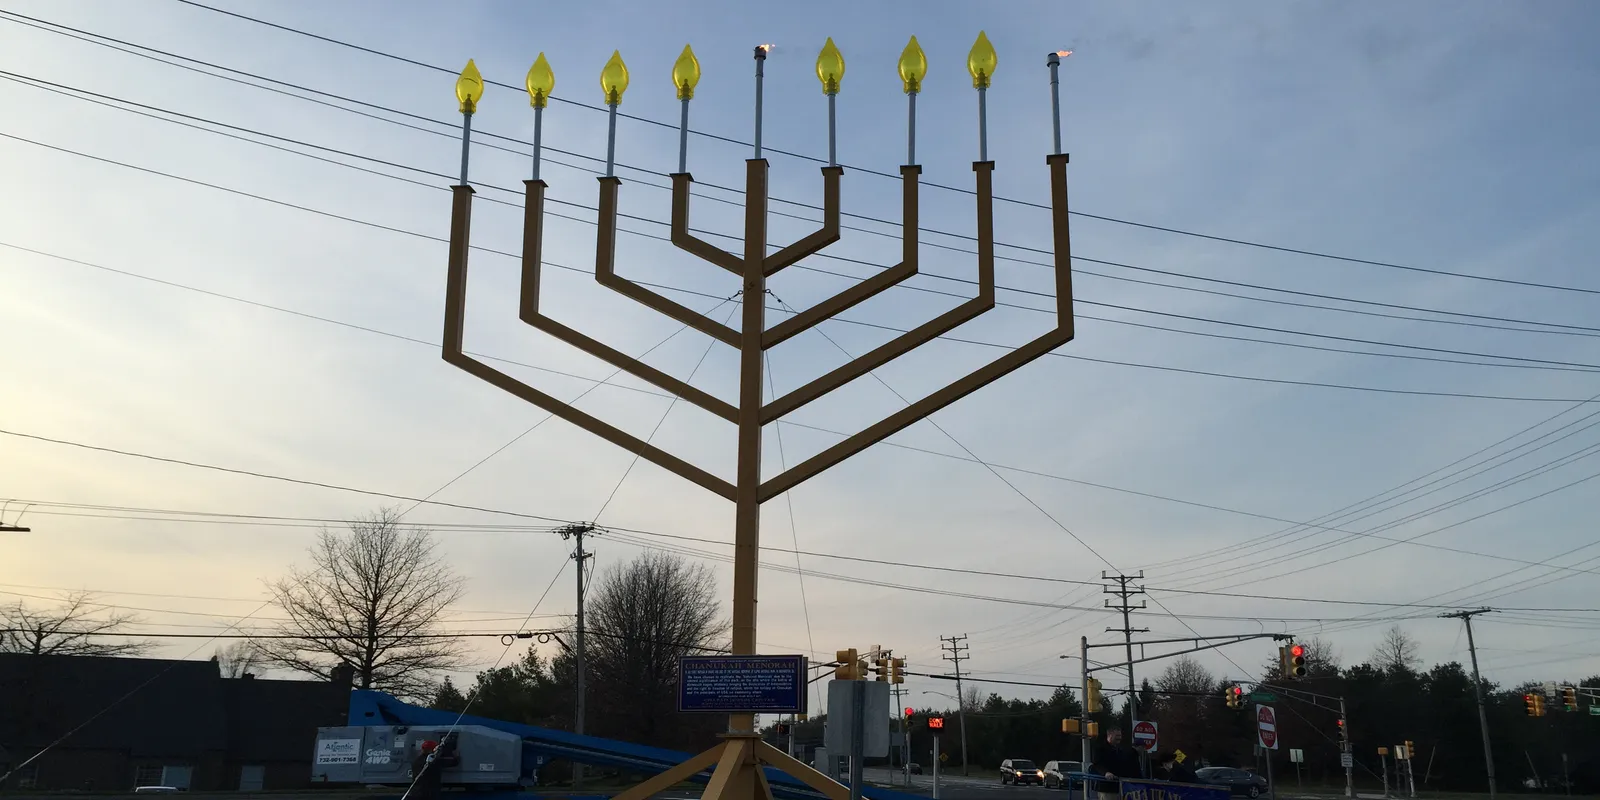 New Jersey's largest menorah lit up in celebration of first night of Hanukkah